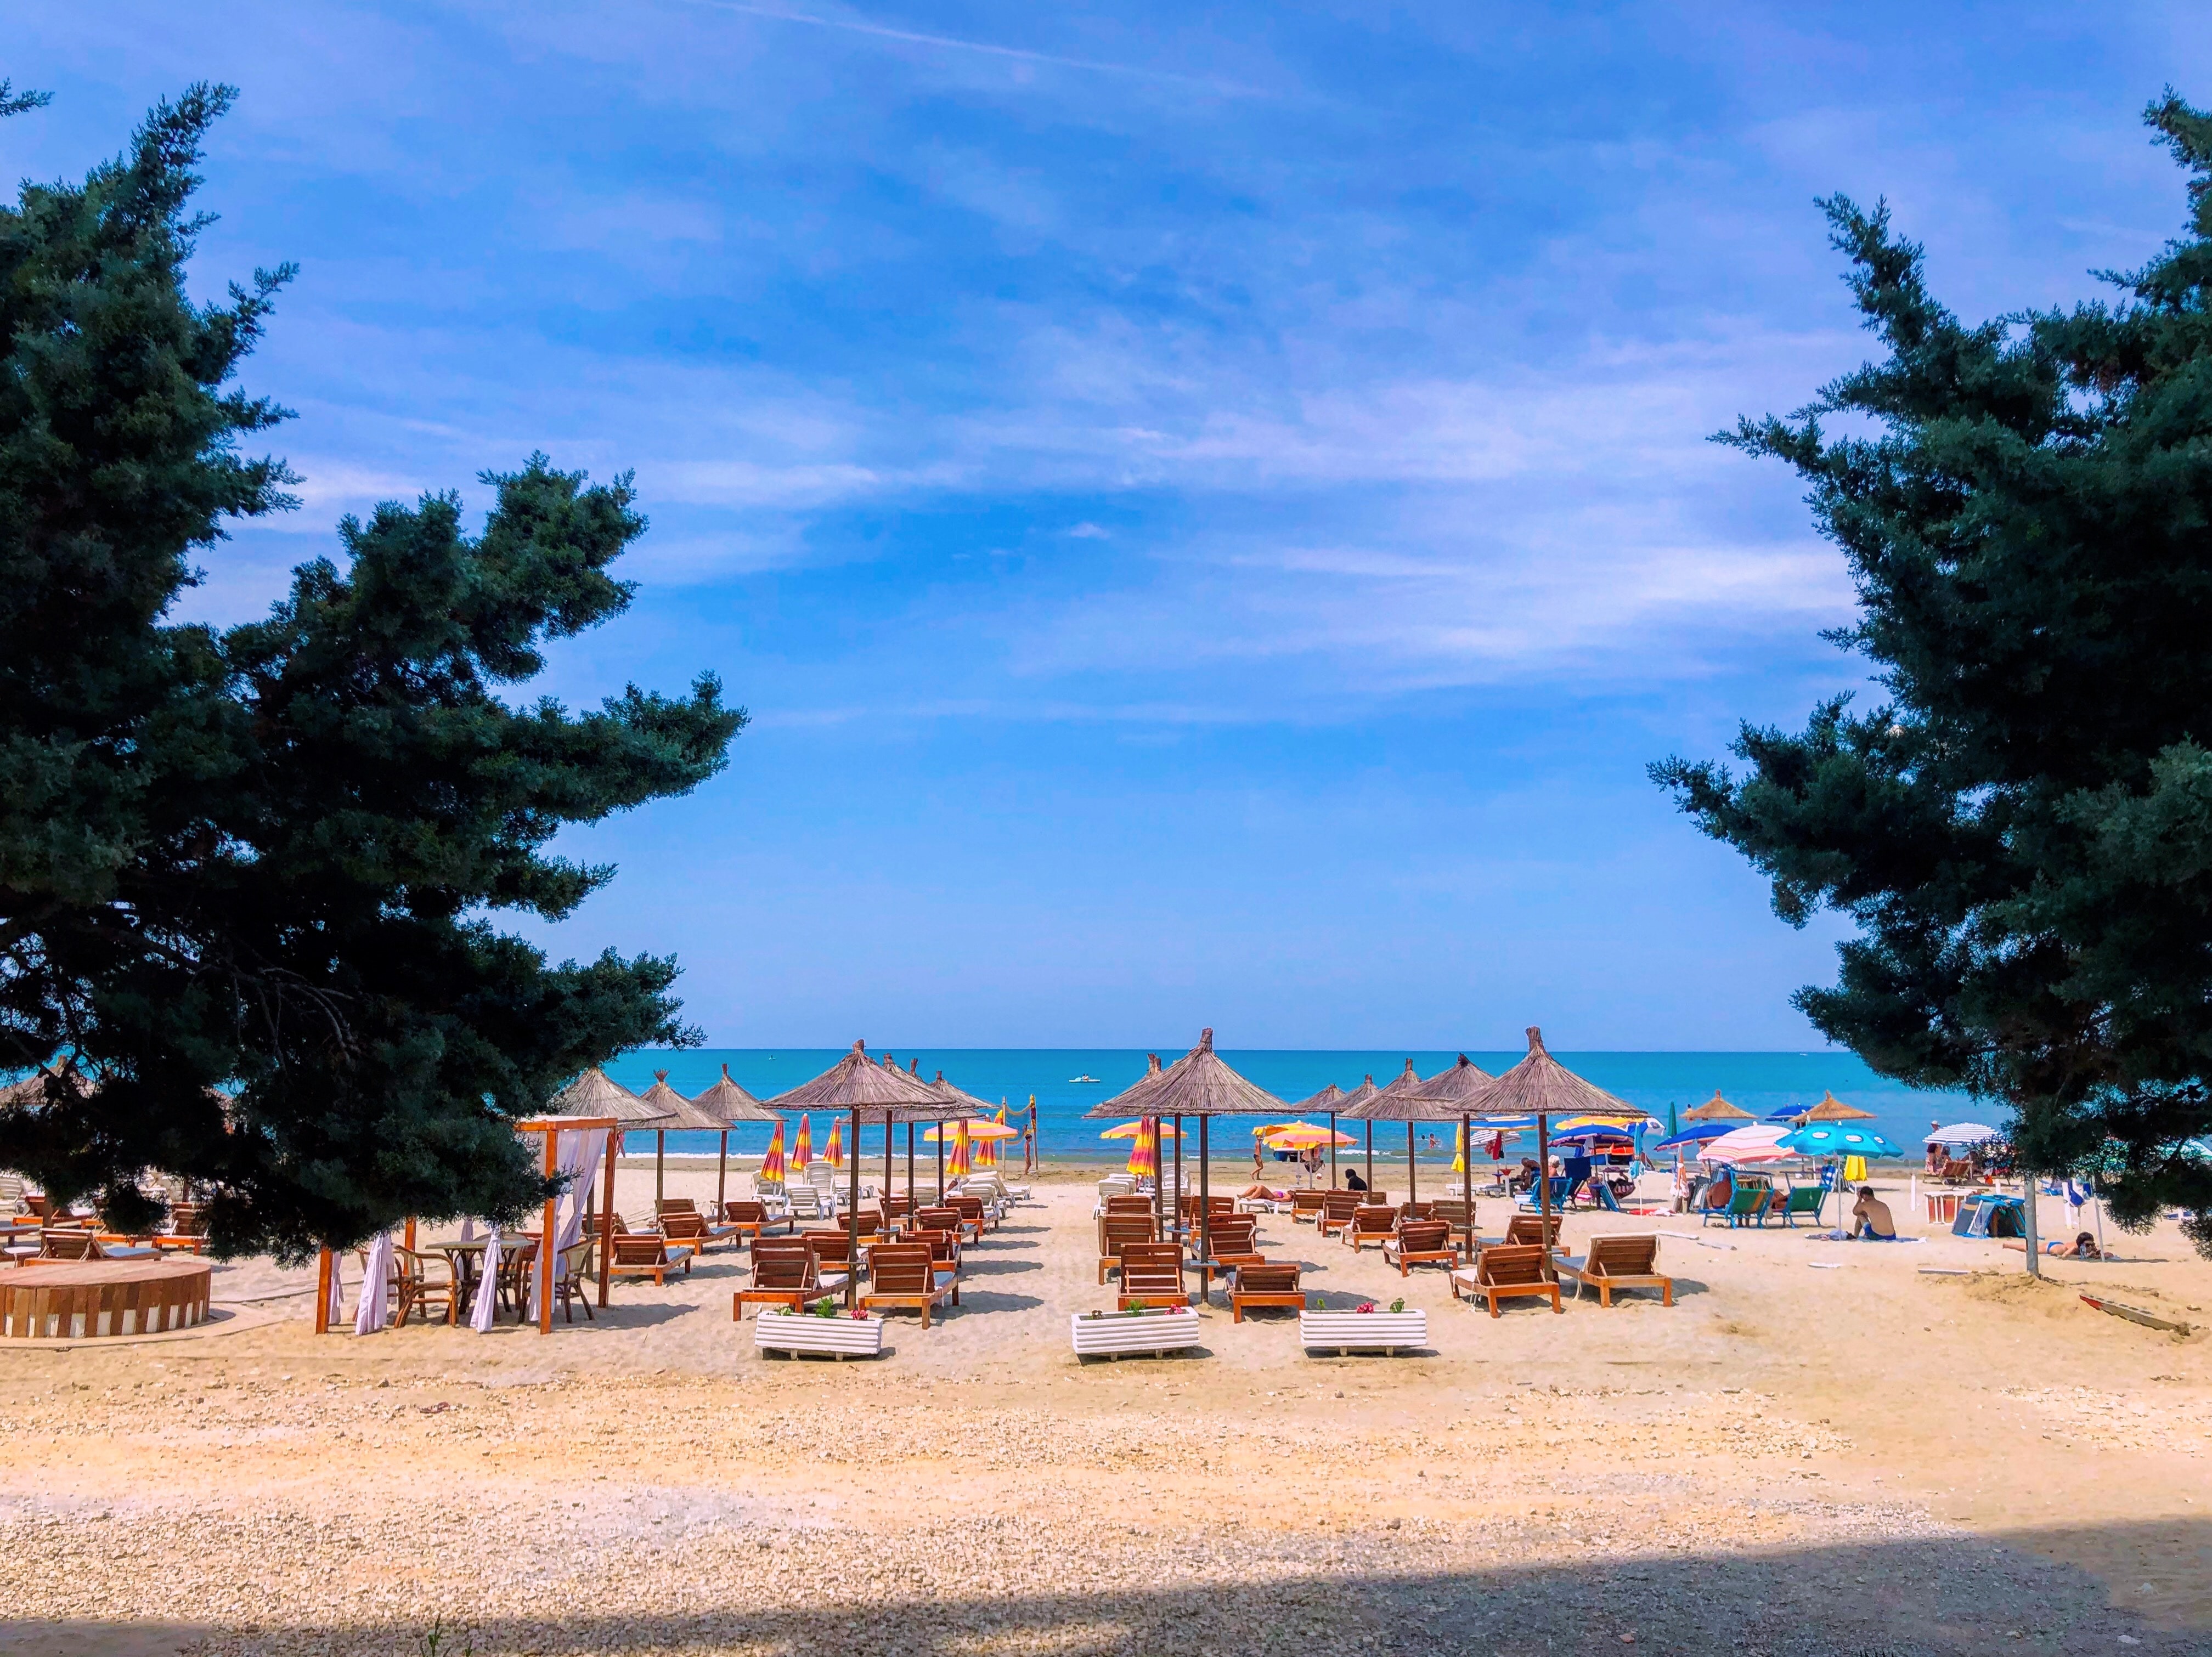 Plazhi Beach in Durres with beach umbrellas and sunbeds